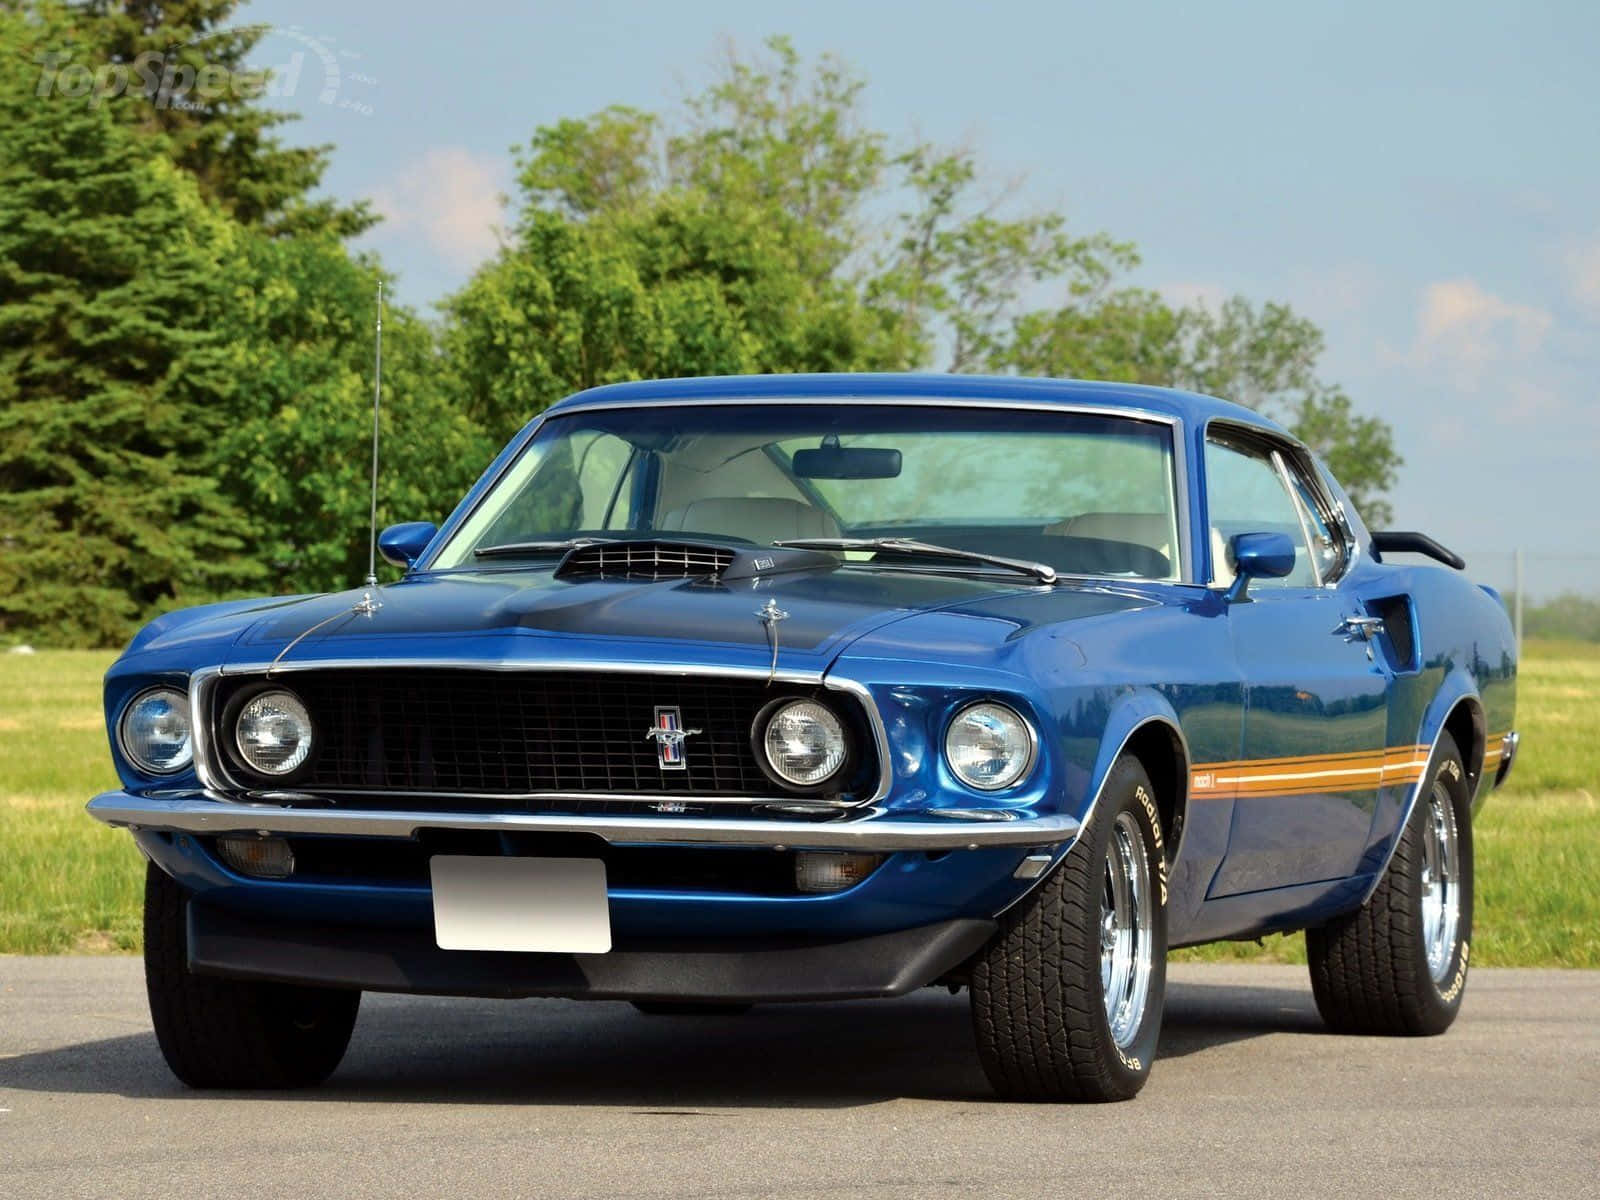 Classic Ford Mustang Mach 1 in action Wallpaper